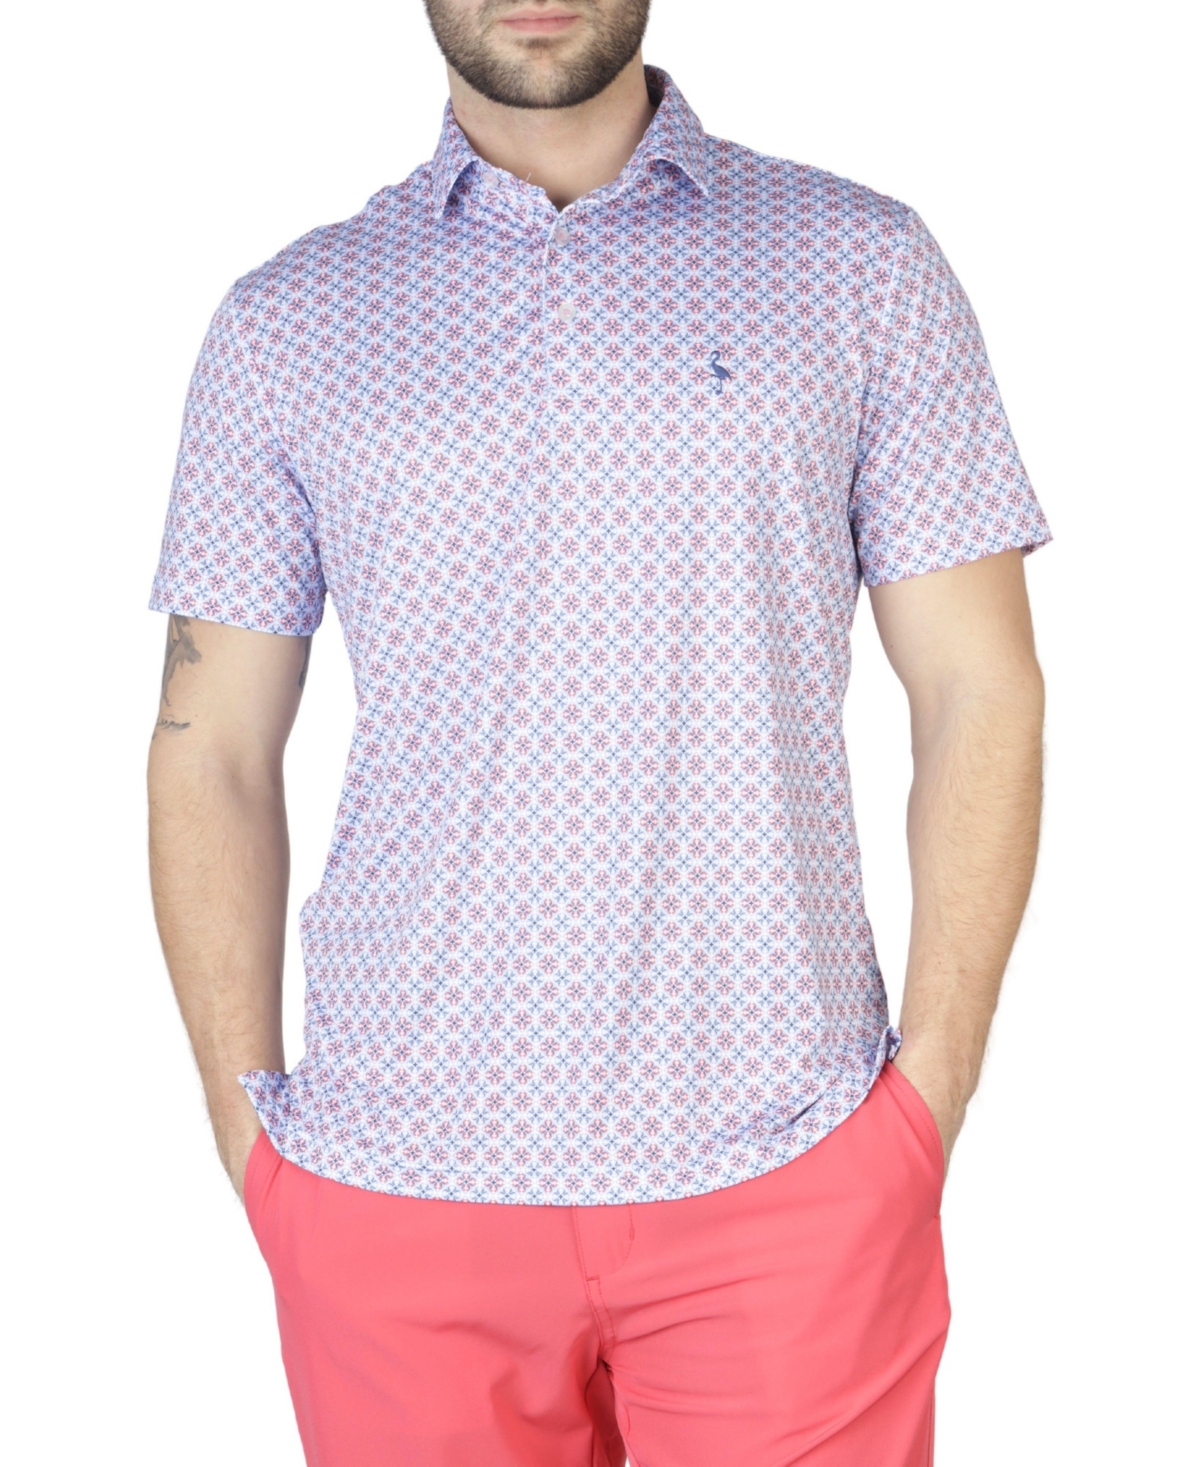 Geo Floral Performance Polo Shirts - Flamingo pink